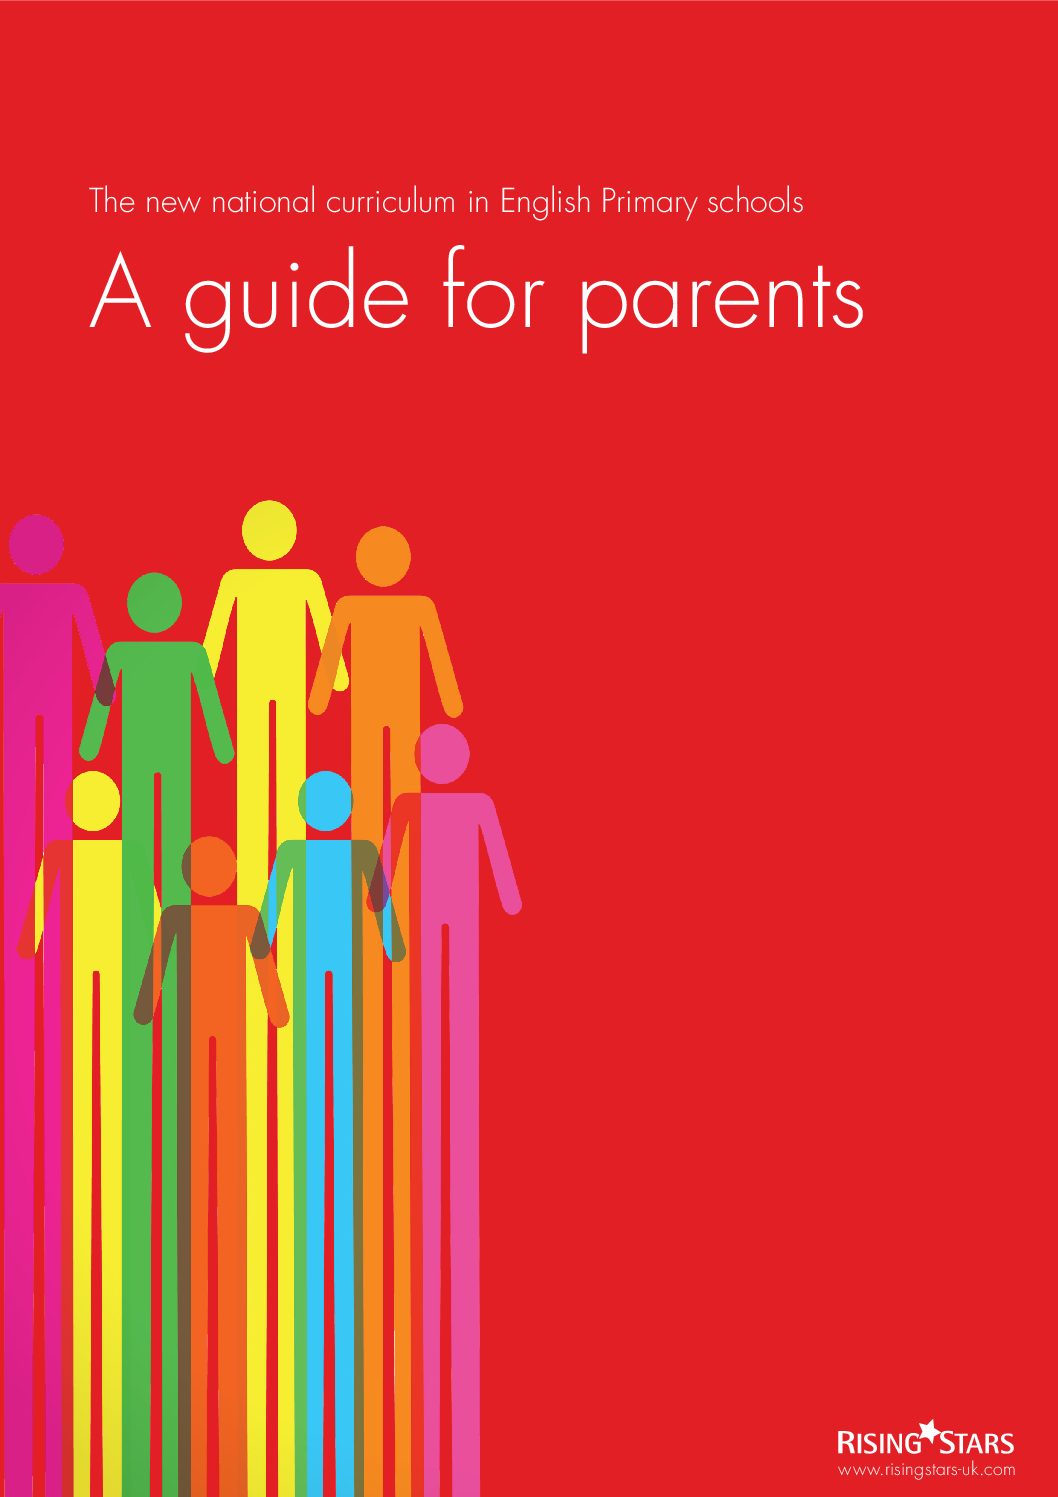 coursework a guide for parents